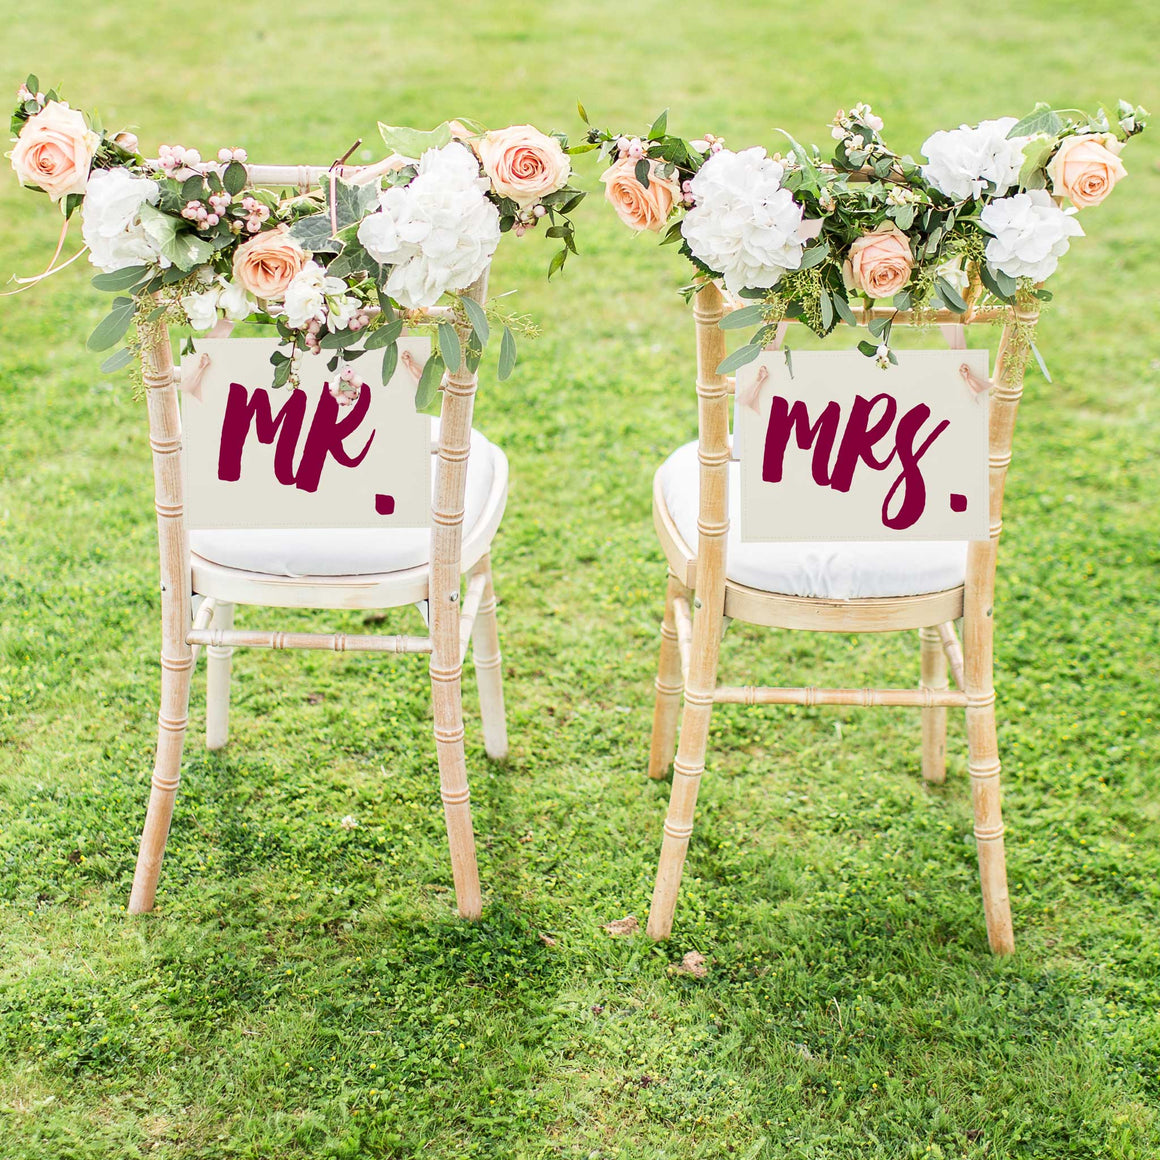 Mr and Mrs wedding chair signs for bride and groom